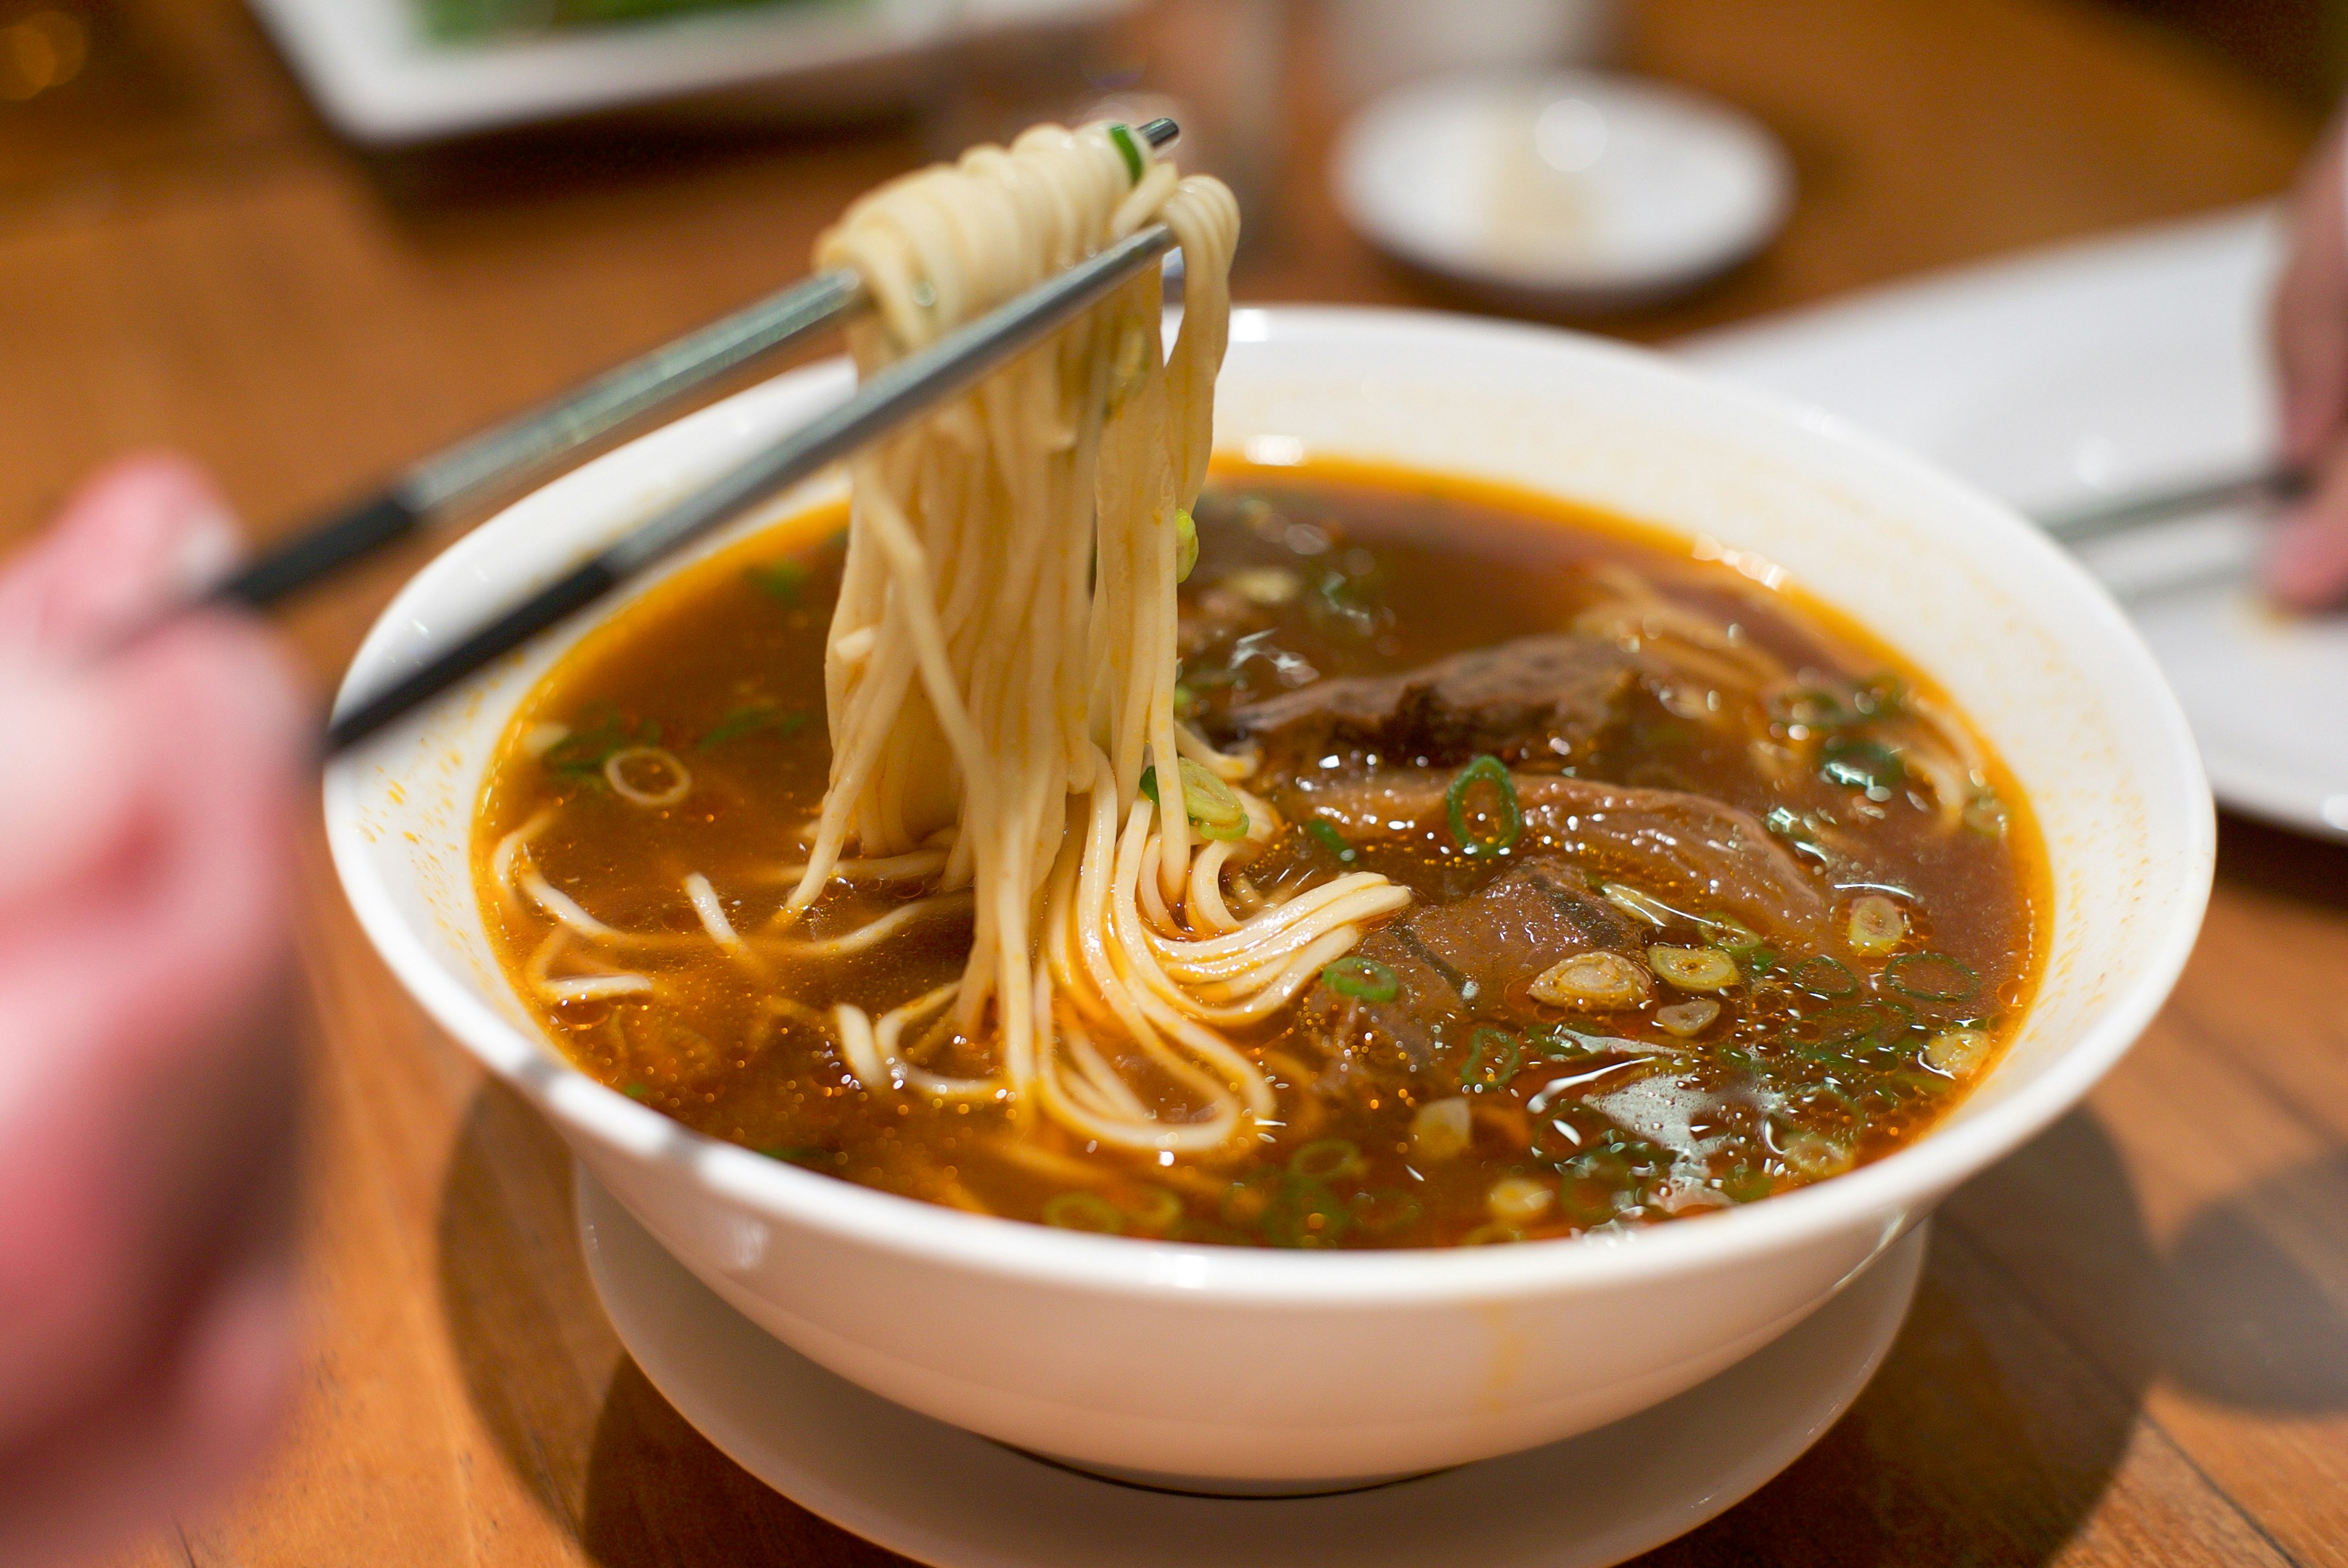 Someone lifts up some noodles from a bowl of brown Taiwanese beef noodles soup using chopsticks